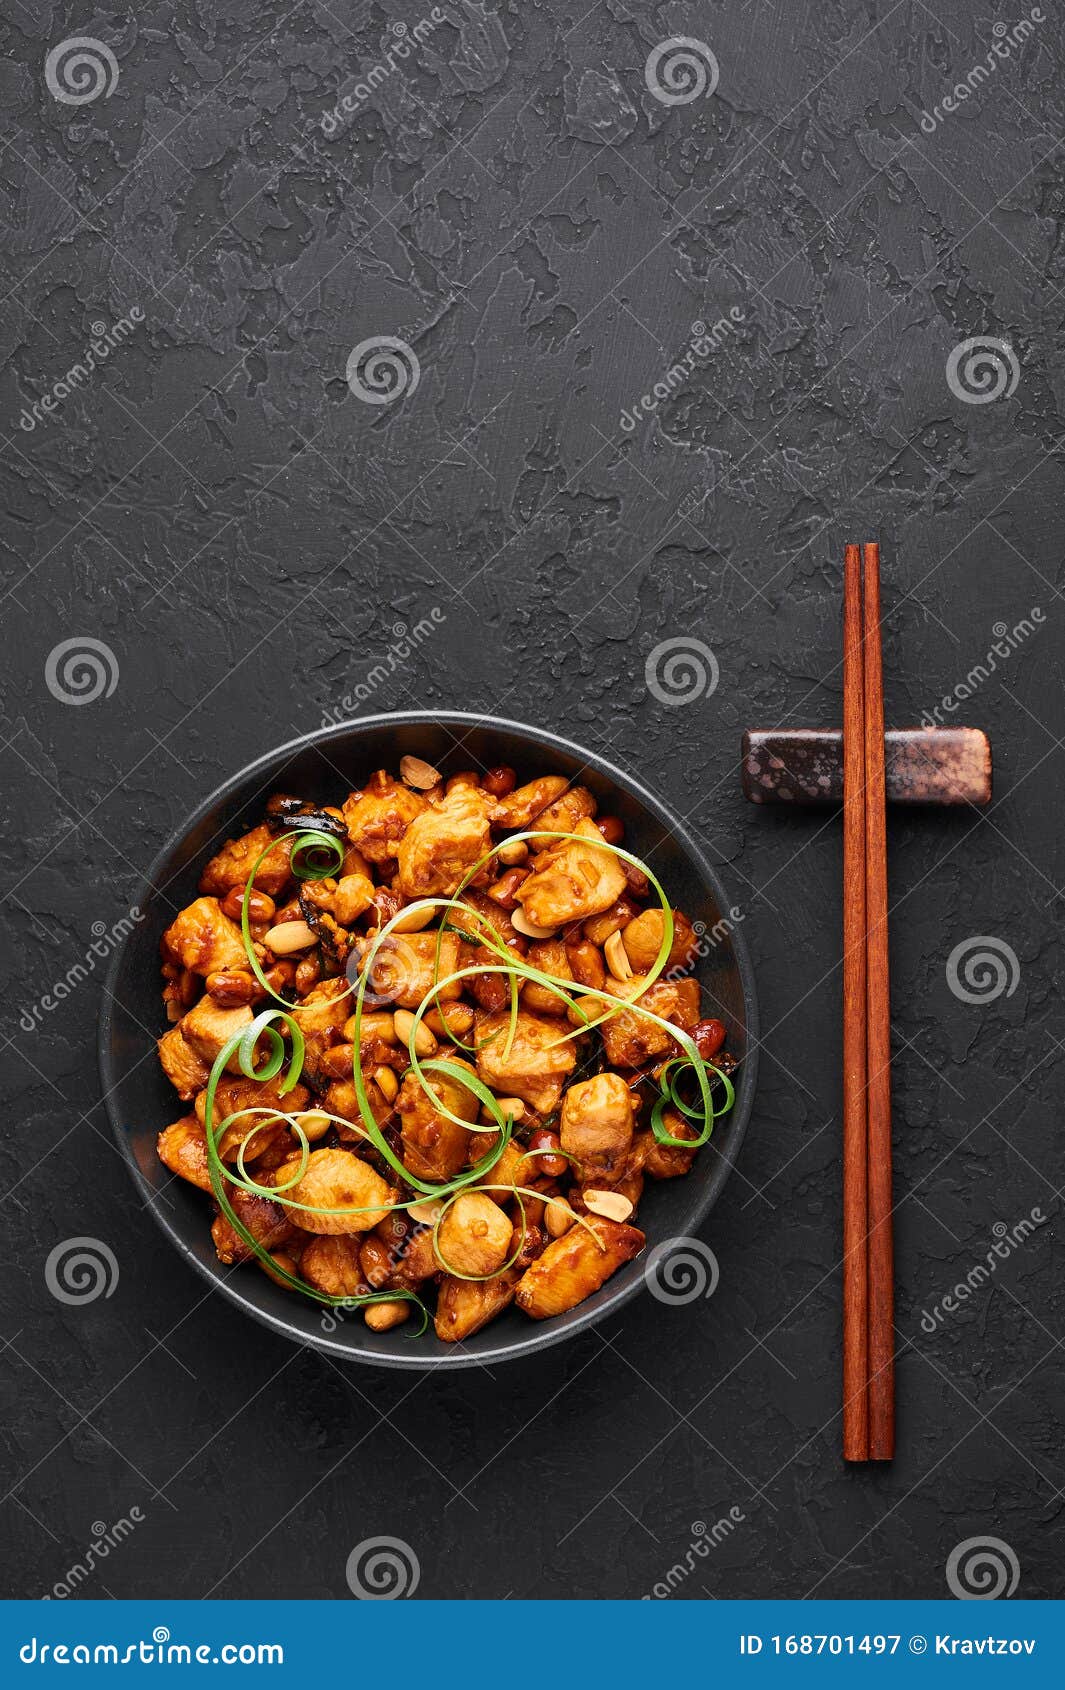 Kung Pao Chicken or Gong Bao Ji Ding at Dark Slate Background. Sichuan ...